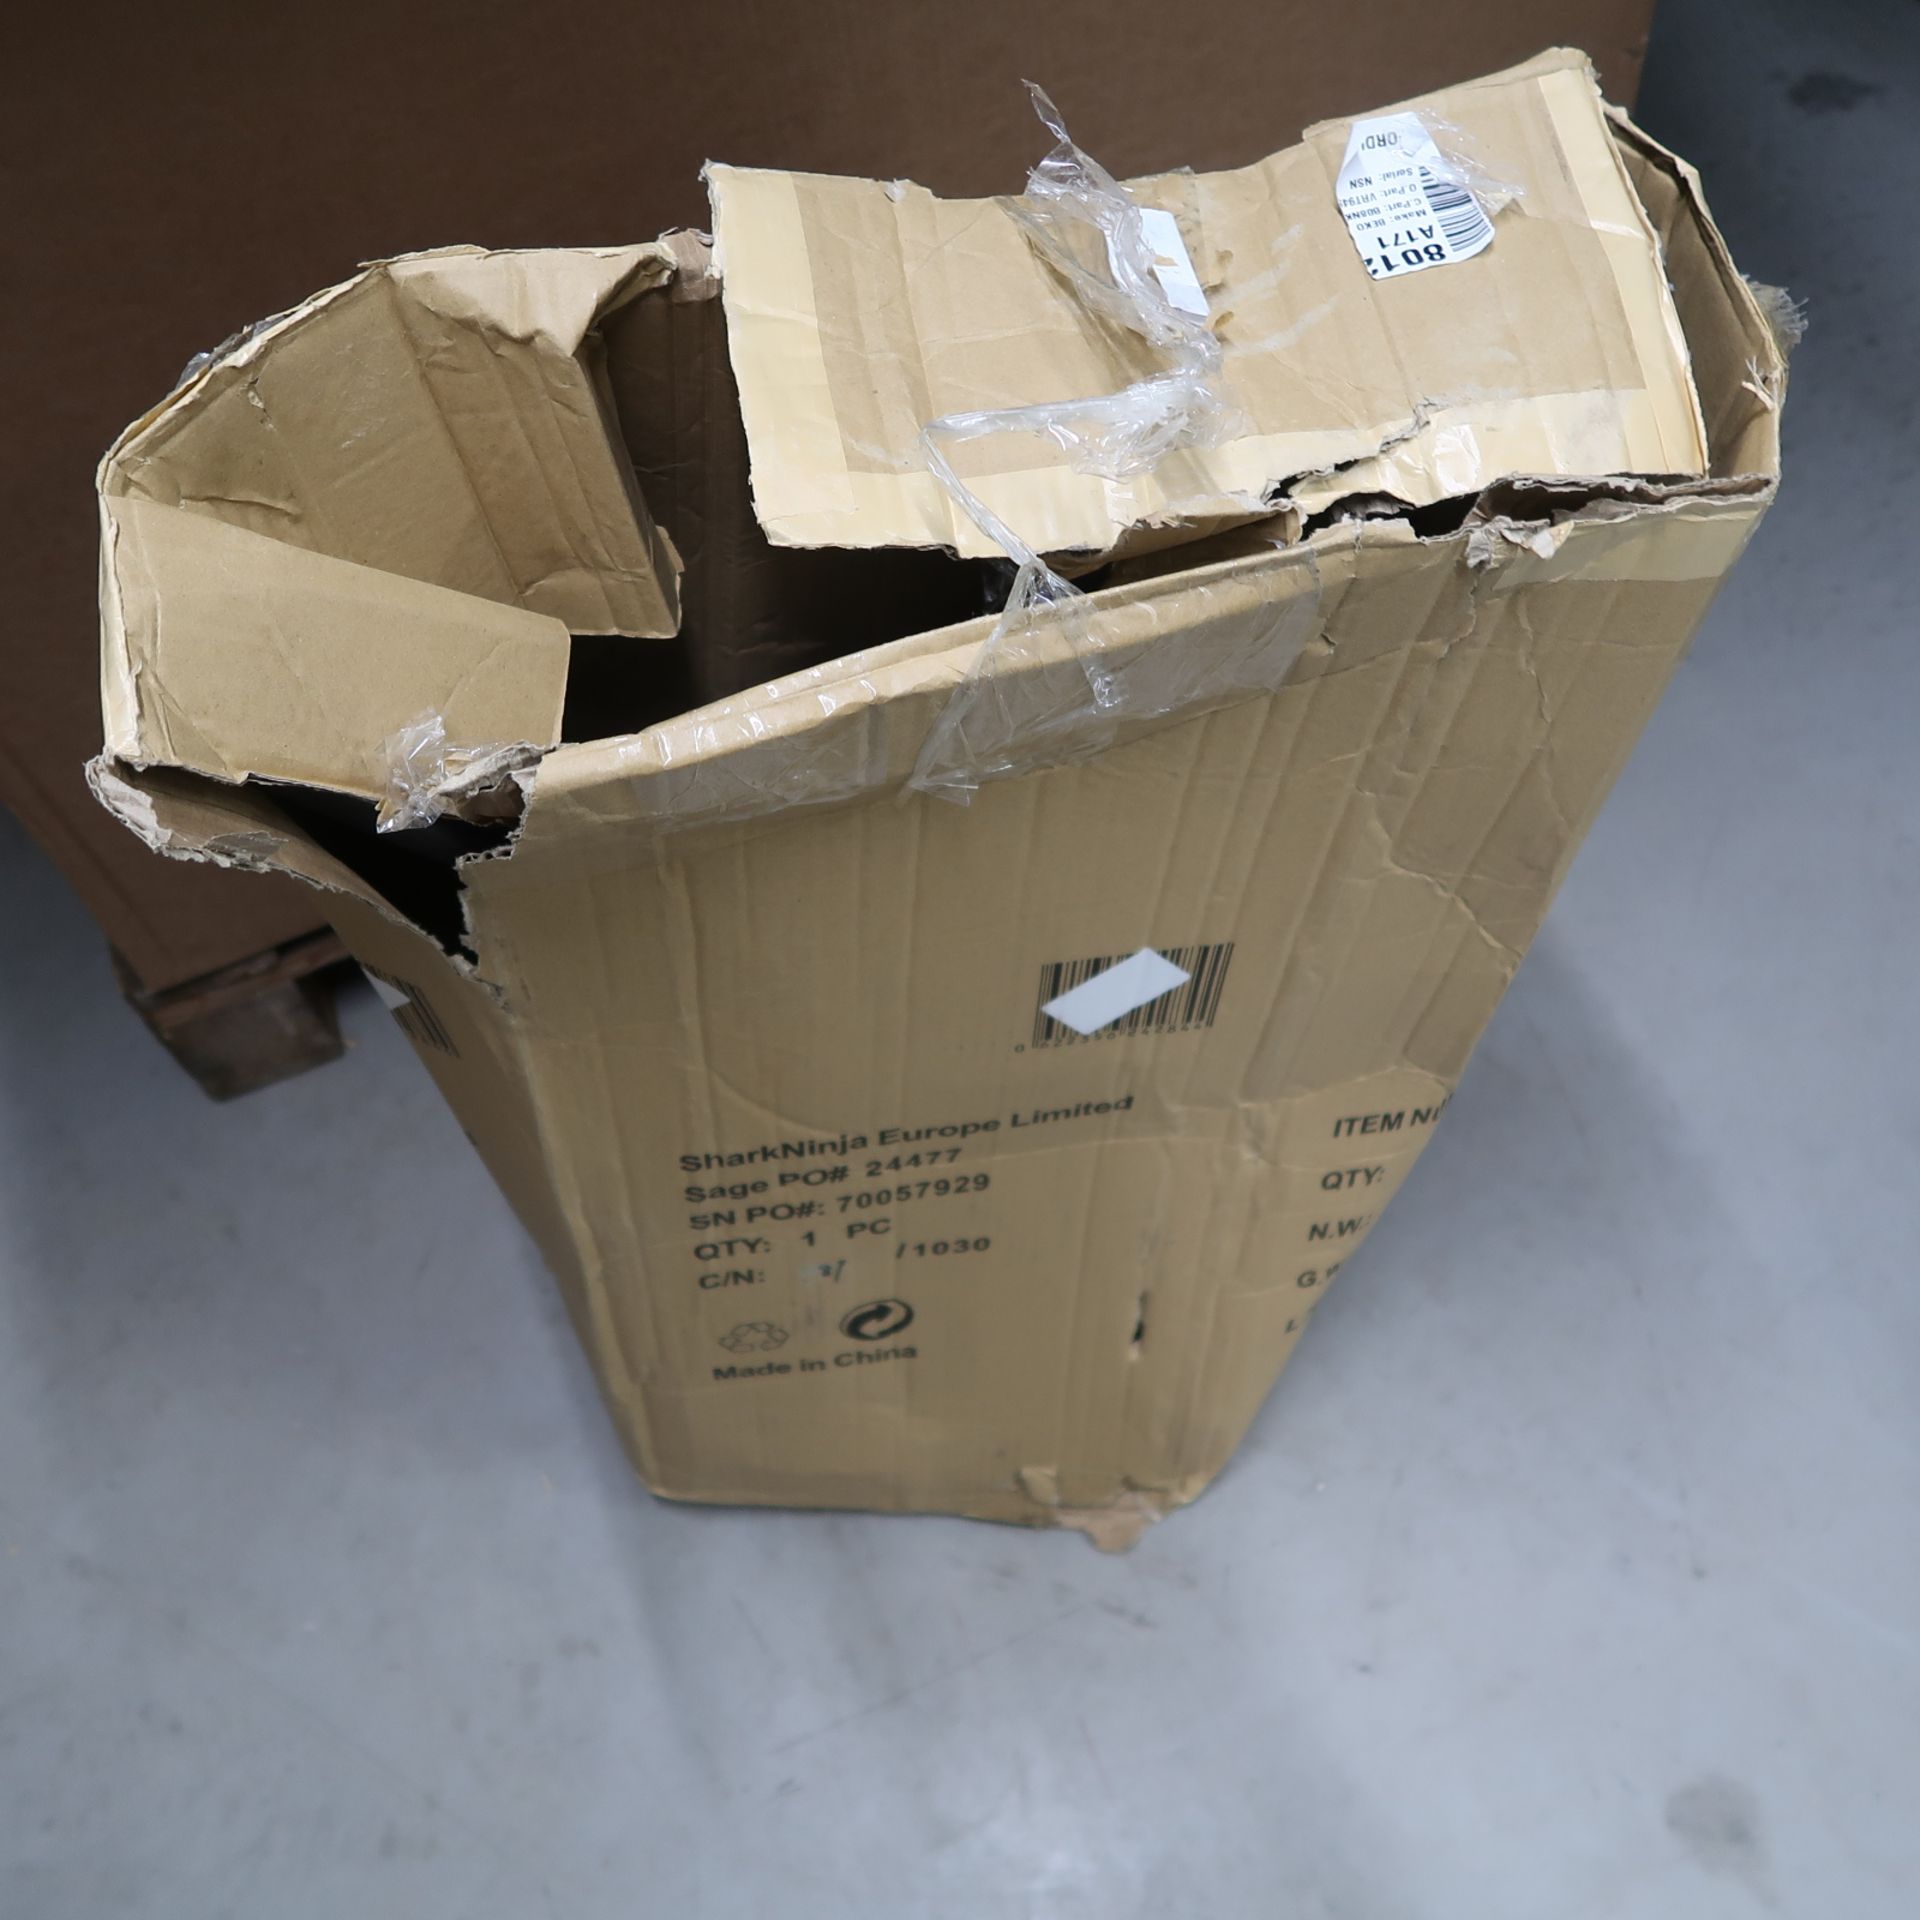 Pallet of Vacuum Cleaners - Category – Retails Returns/Spare Parts – P104 - Image 14 of 15